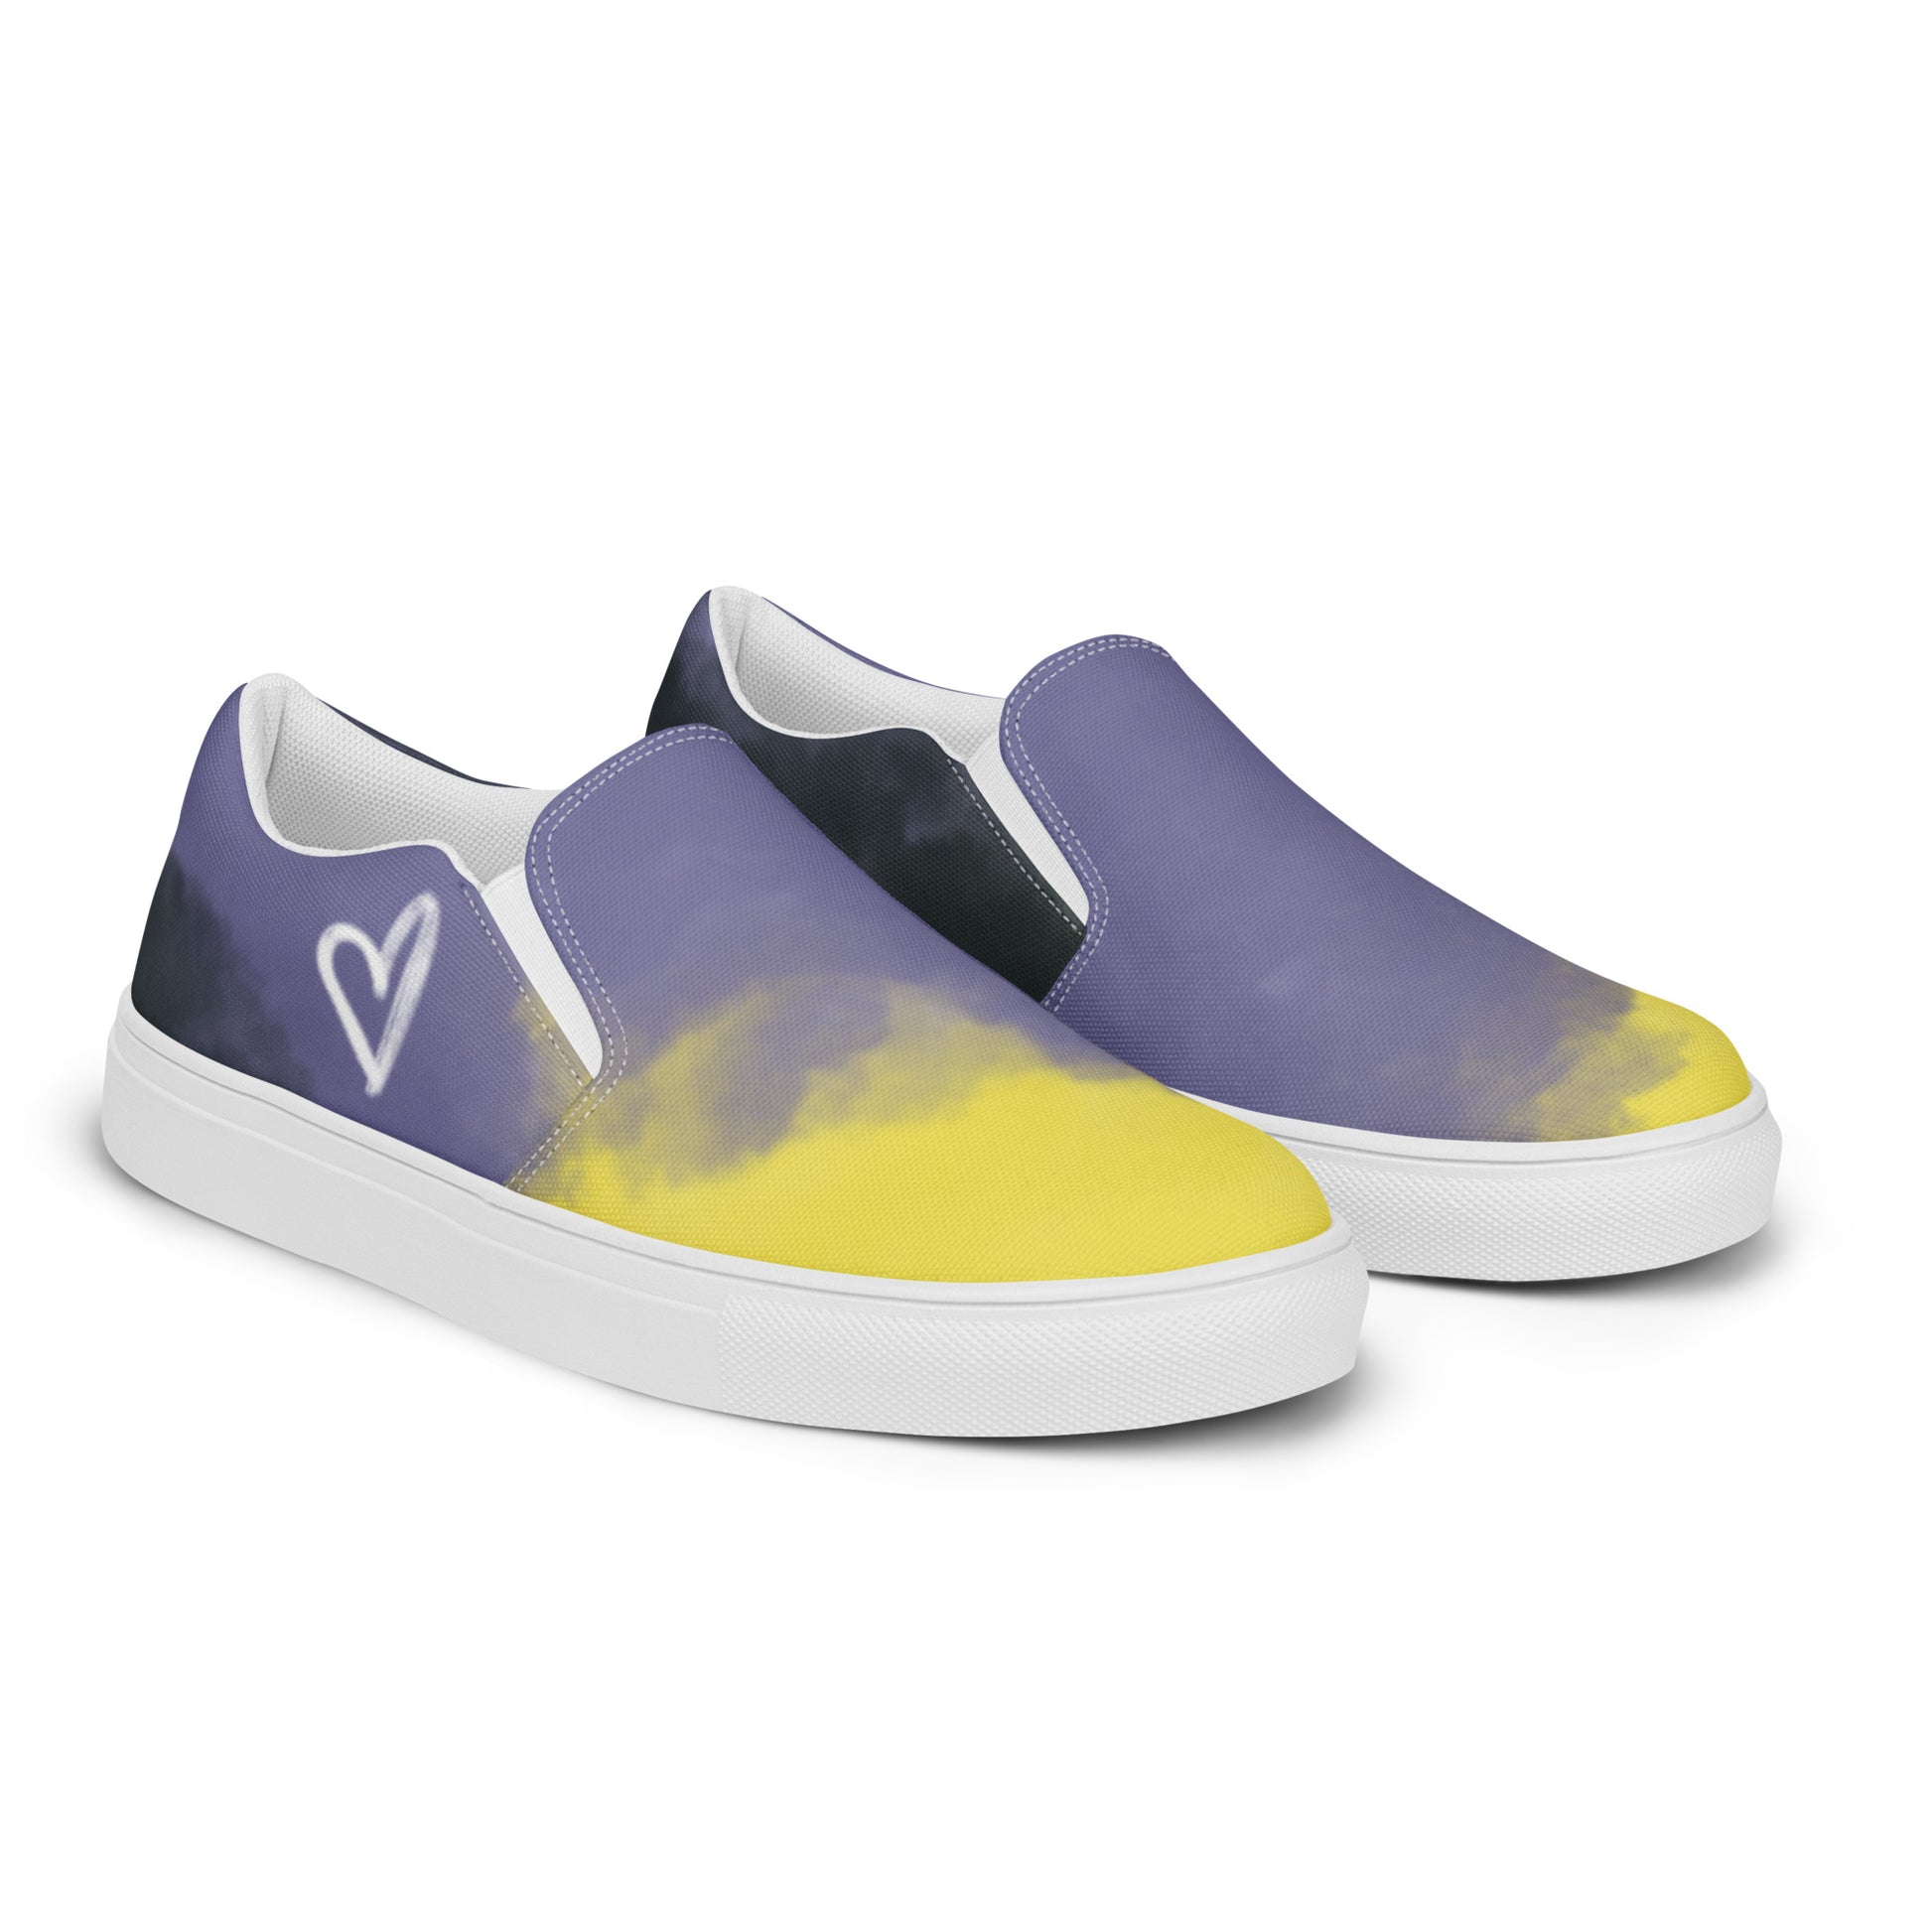 Right front view: A pair of slip-on shoes with the non-binary colors in wisps of clouds with a white hand drawn heart on the outside under the ankle and the Aras Sivad Studio logo in white on the back.